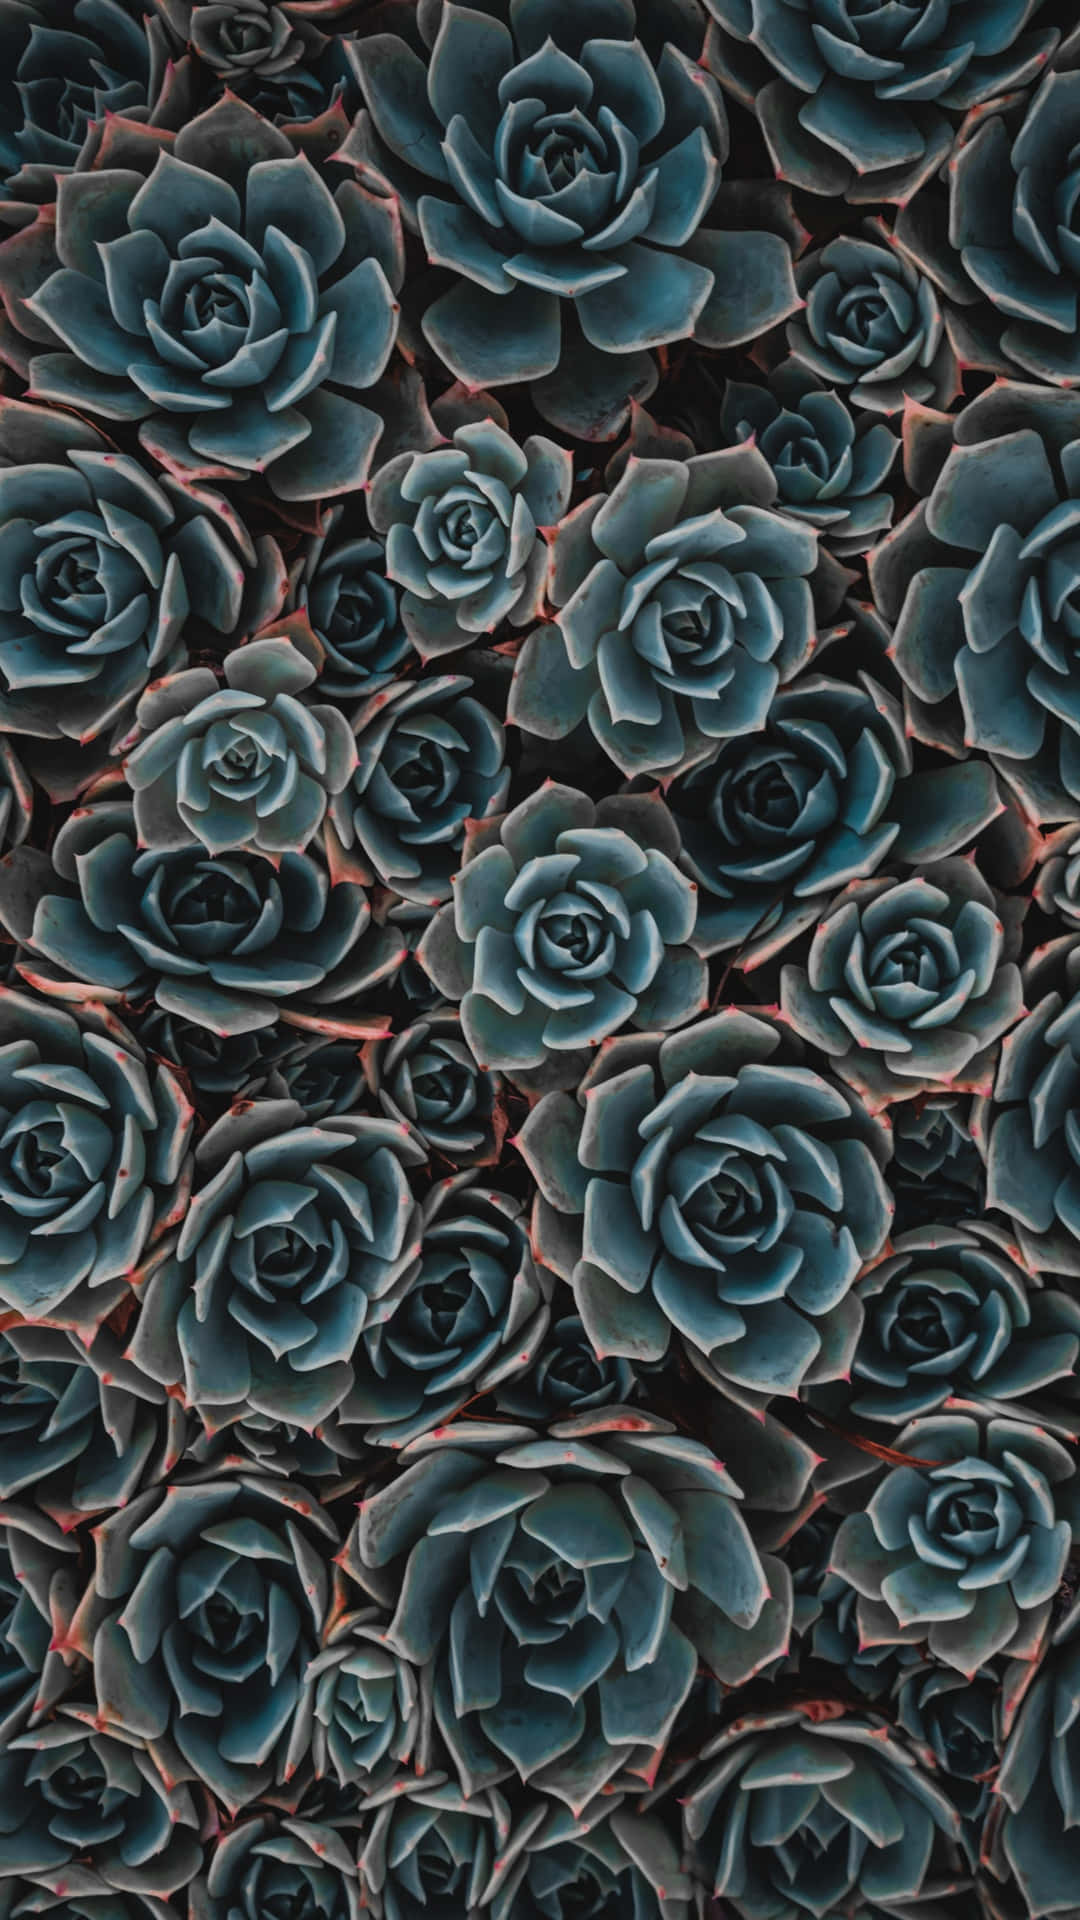 Refresh Your Phone's Wallpaper With This Succulent Rose Iphone Background Wallpaper